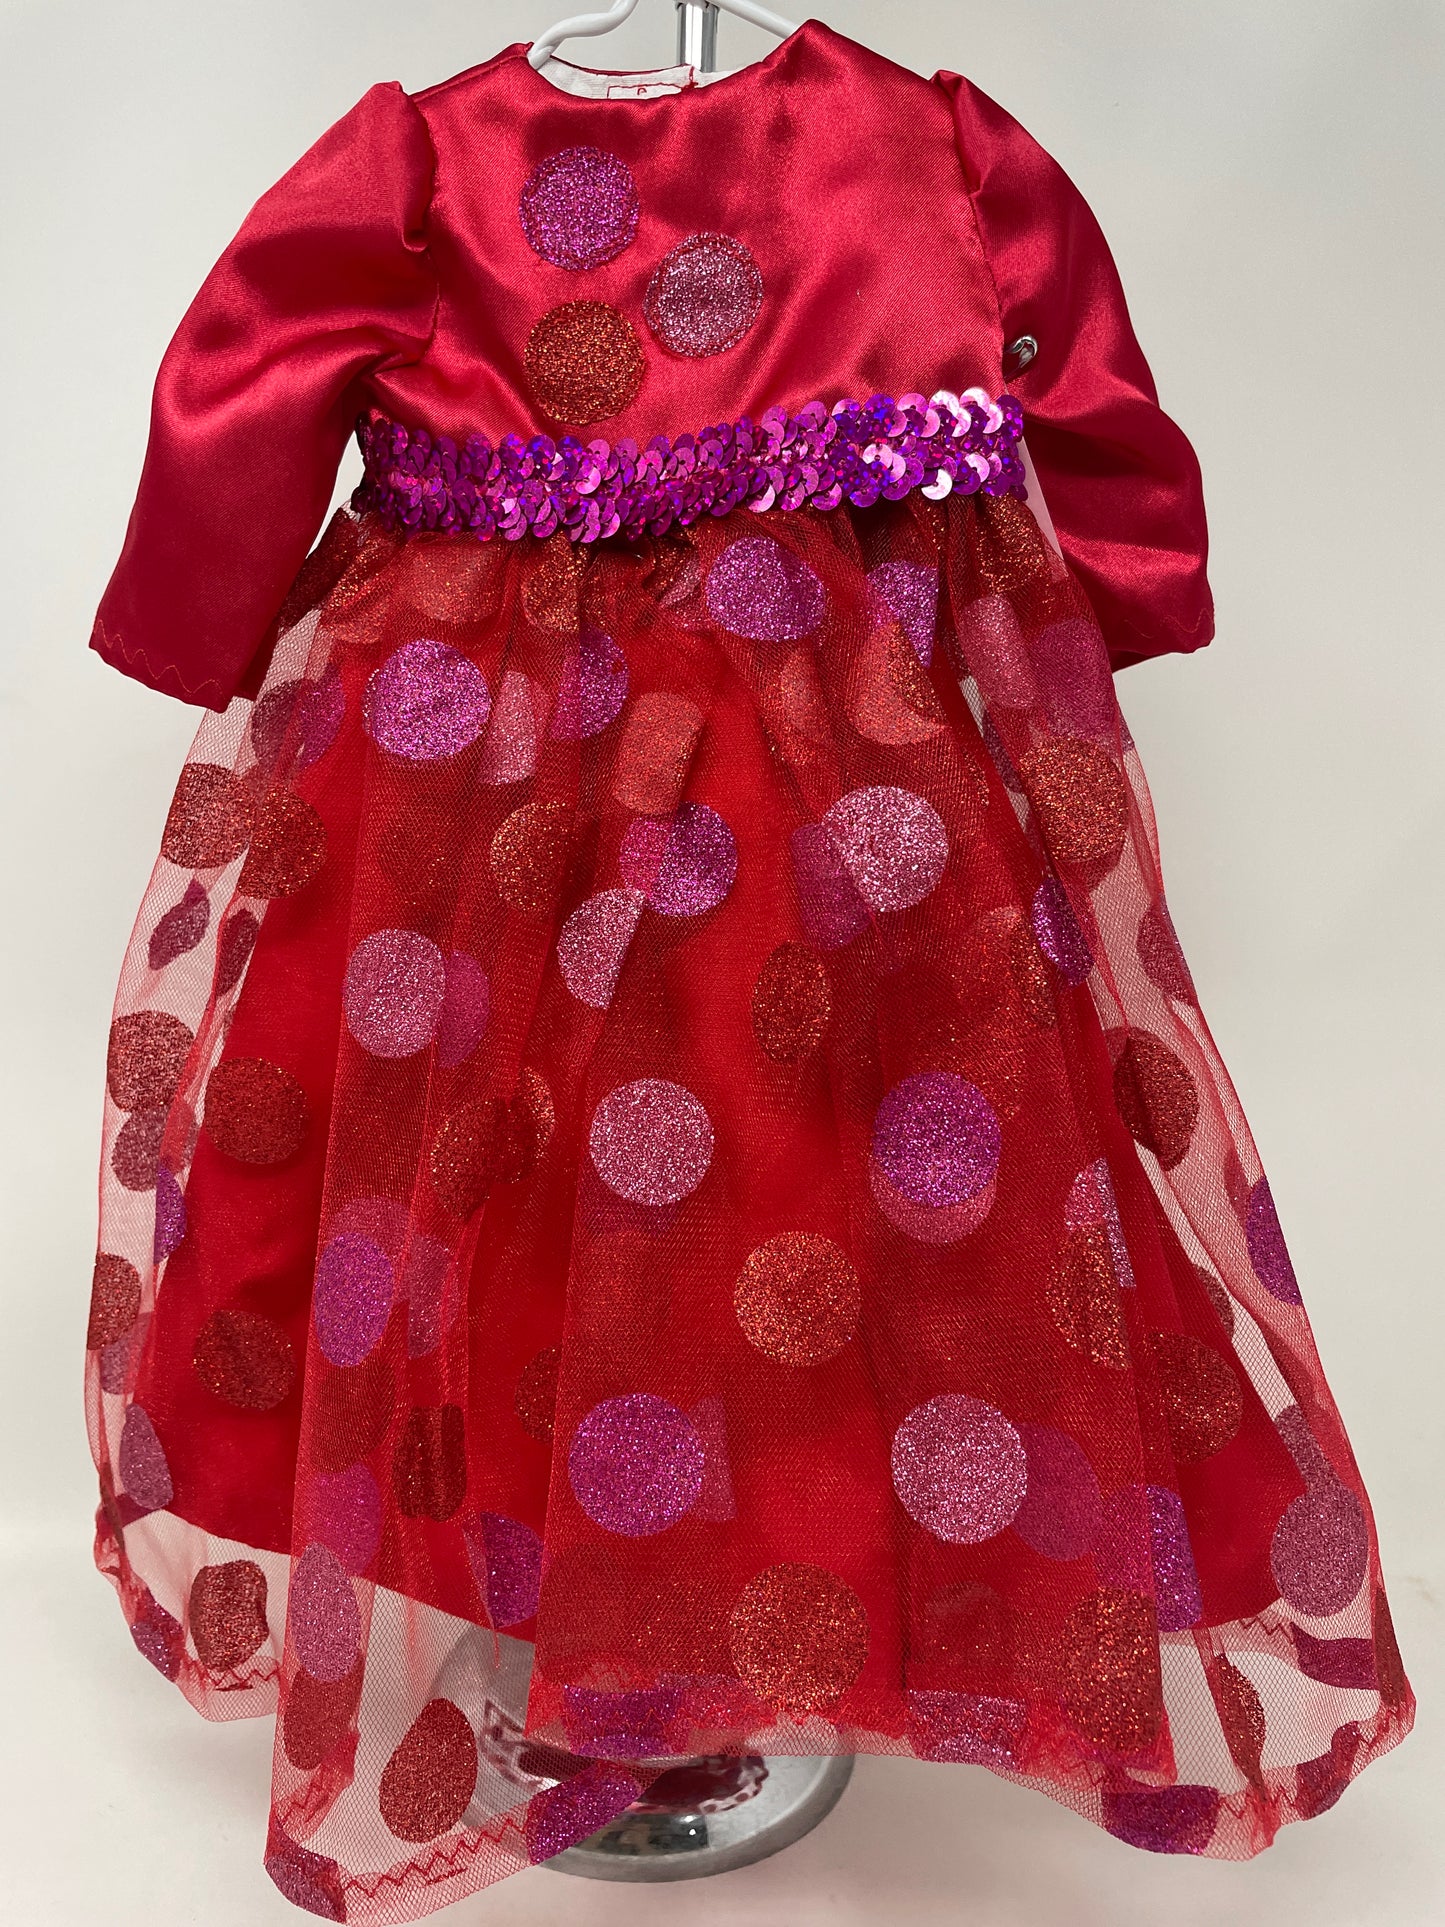 Red with Purple Sparkle Dress for 18" Doll